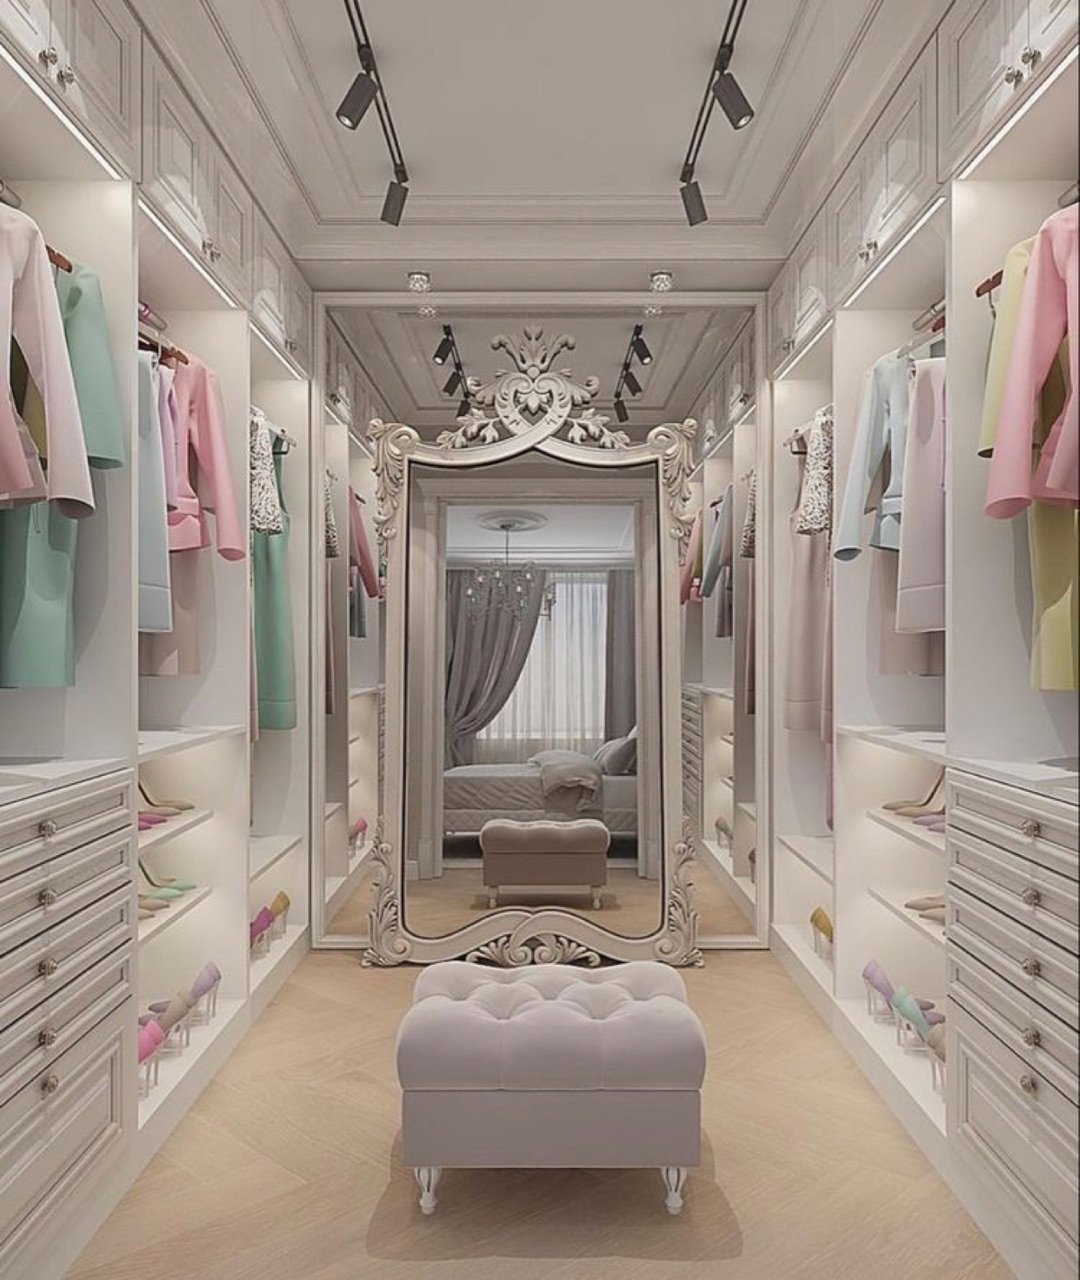 20 Dressing Room Ideas to Make Your Life More Glamorous